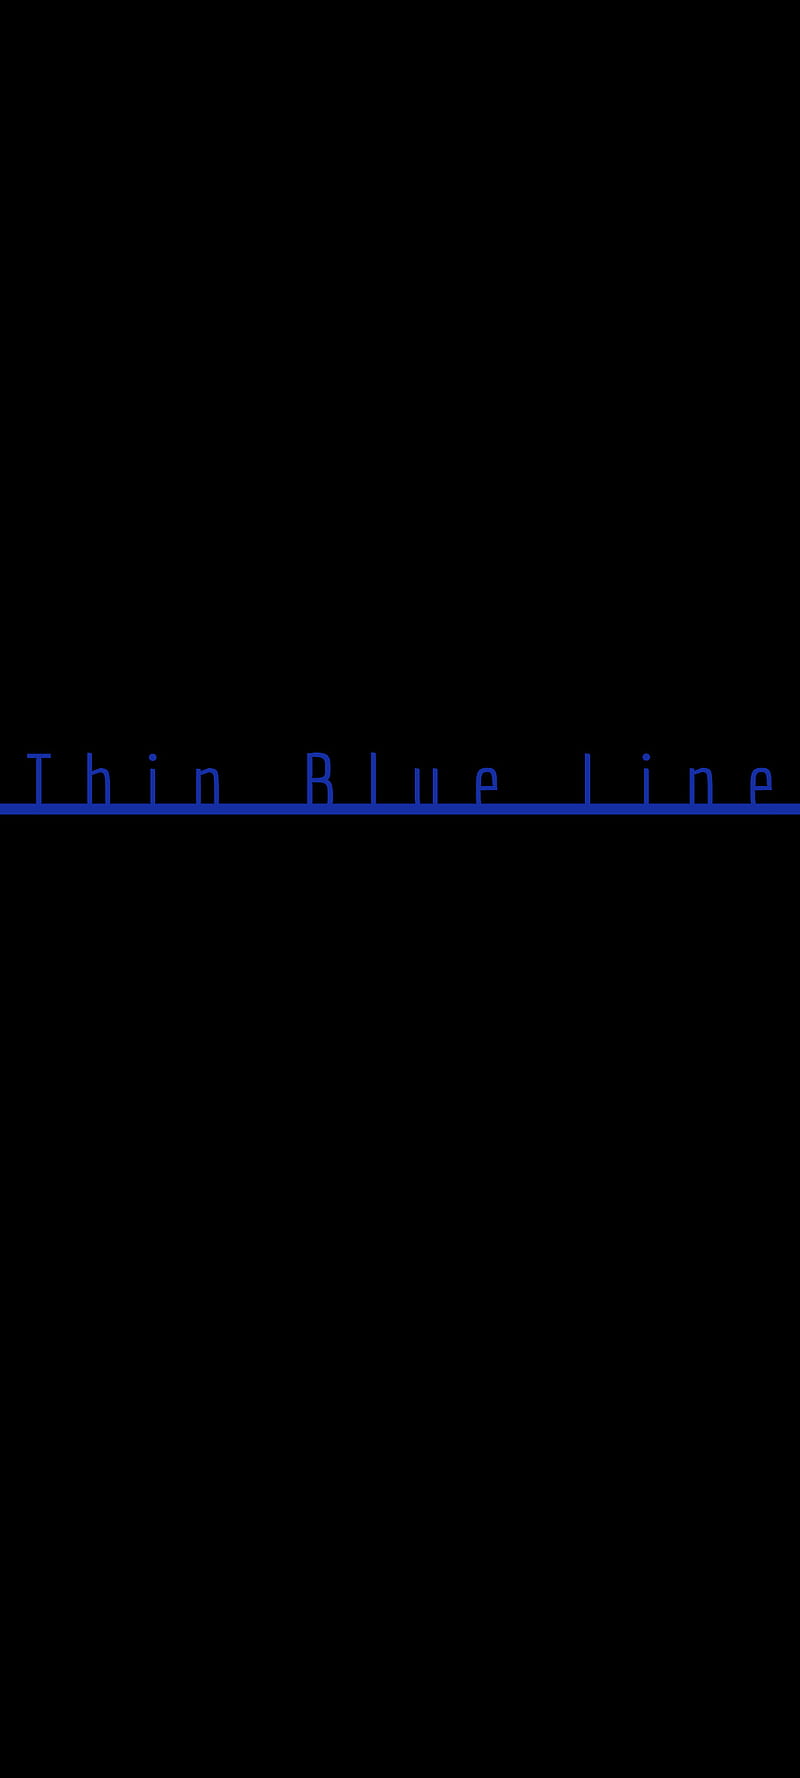 Thin Blue Line, emergency services, police, HD phone wallpaper